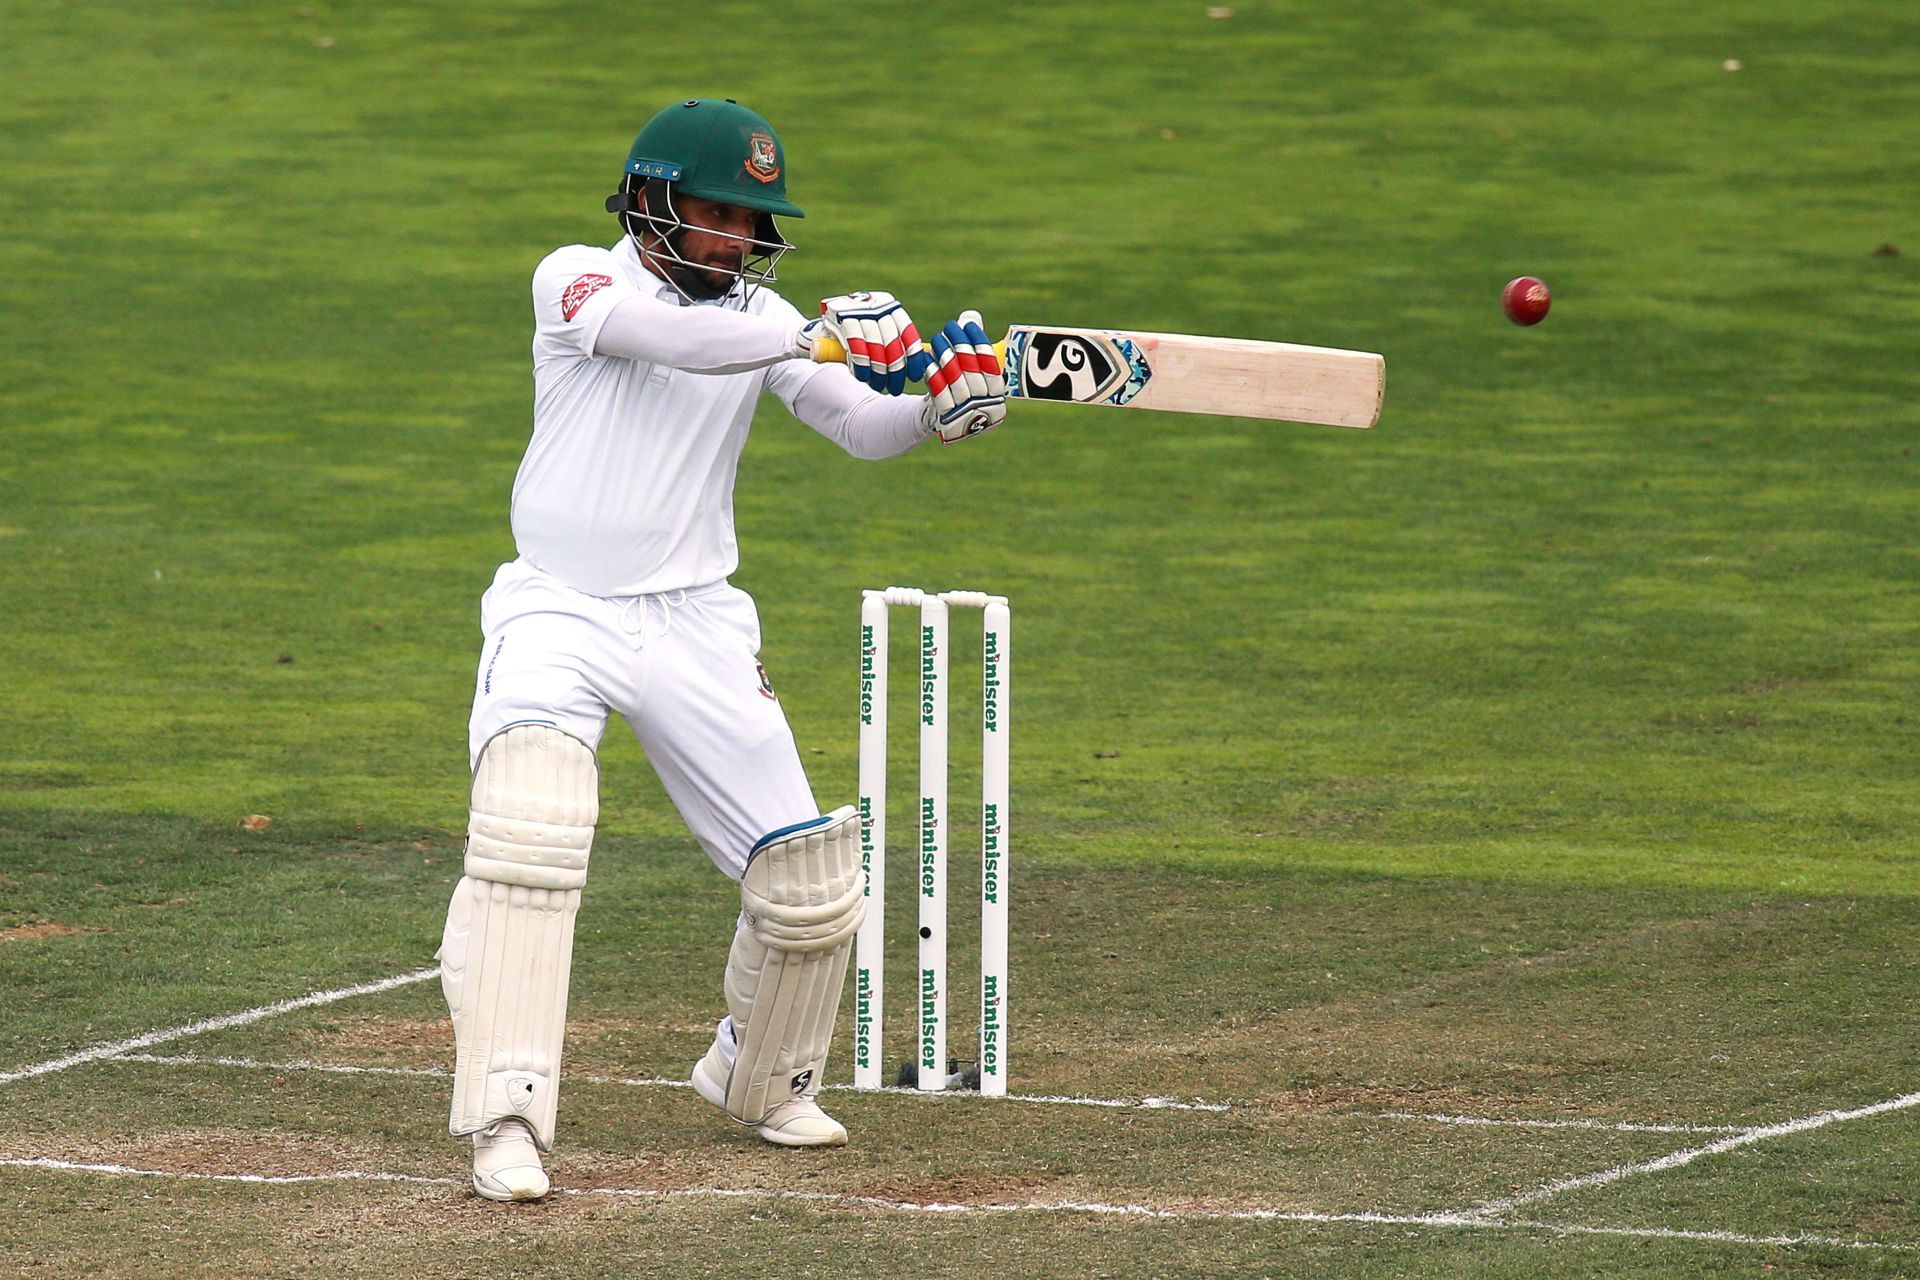 Mominul Haque will lead Bangladesh in the upcoming Test series against Pakistan